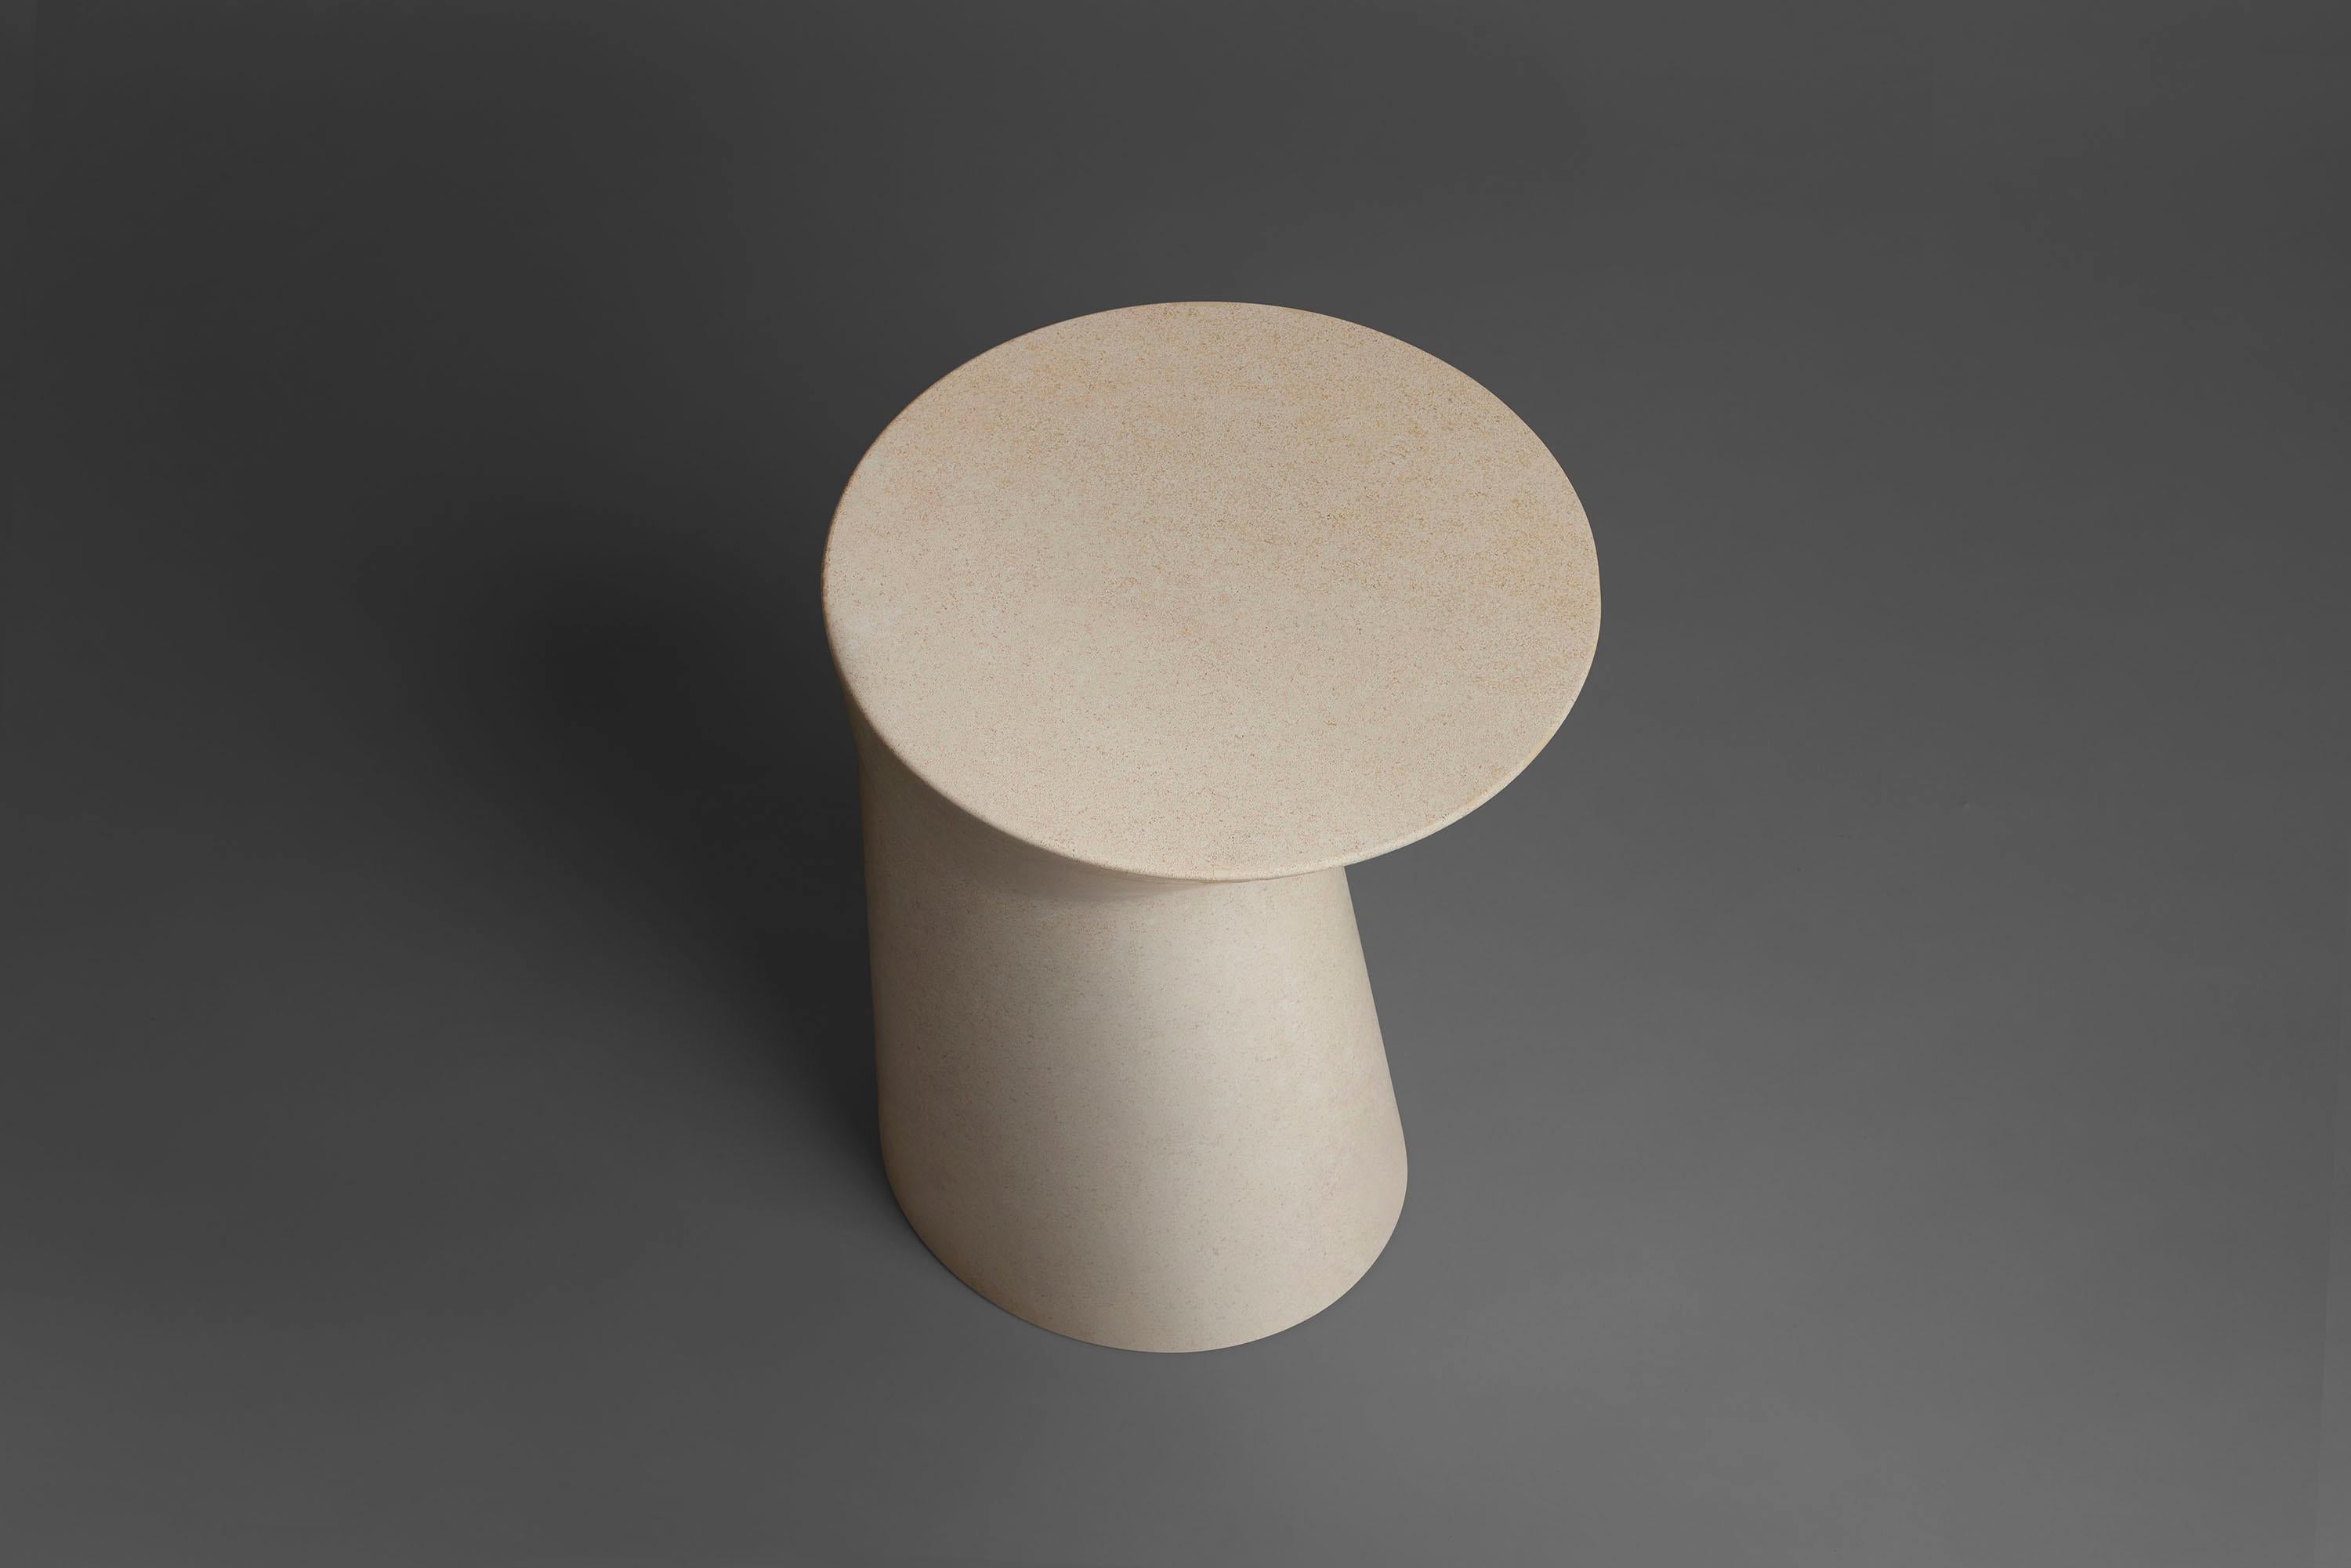 Chinese Side Table in Chauvigny stone, Io medium by Adolfo Abejon For Sale